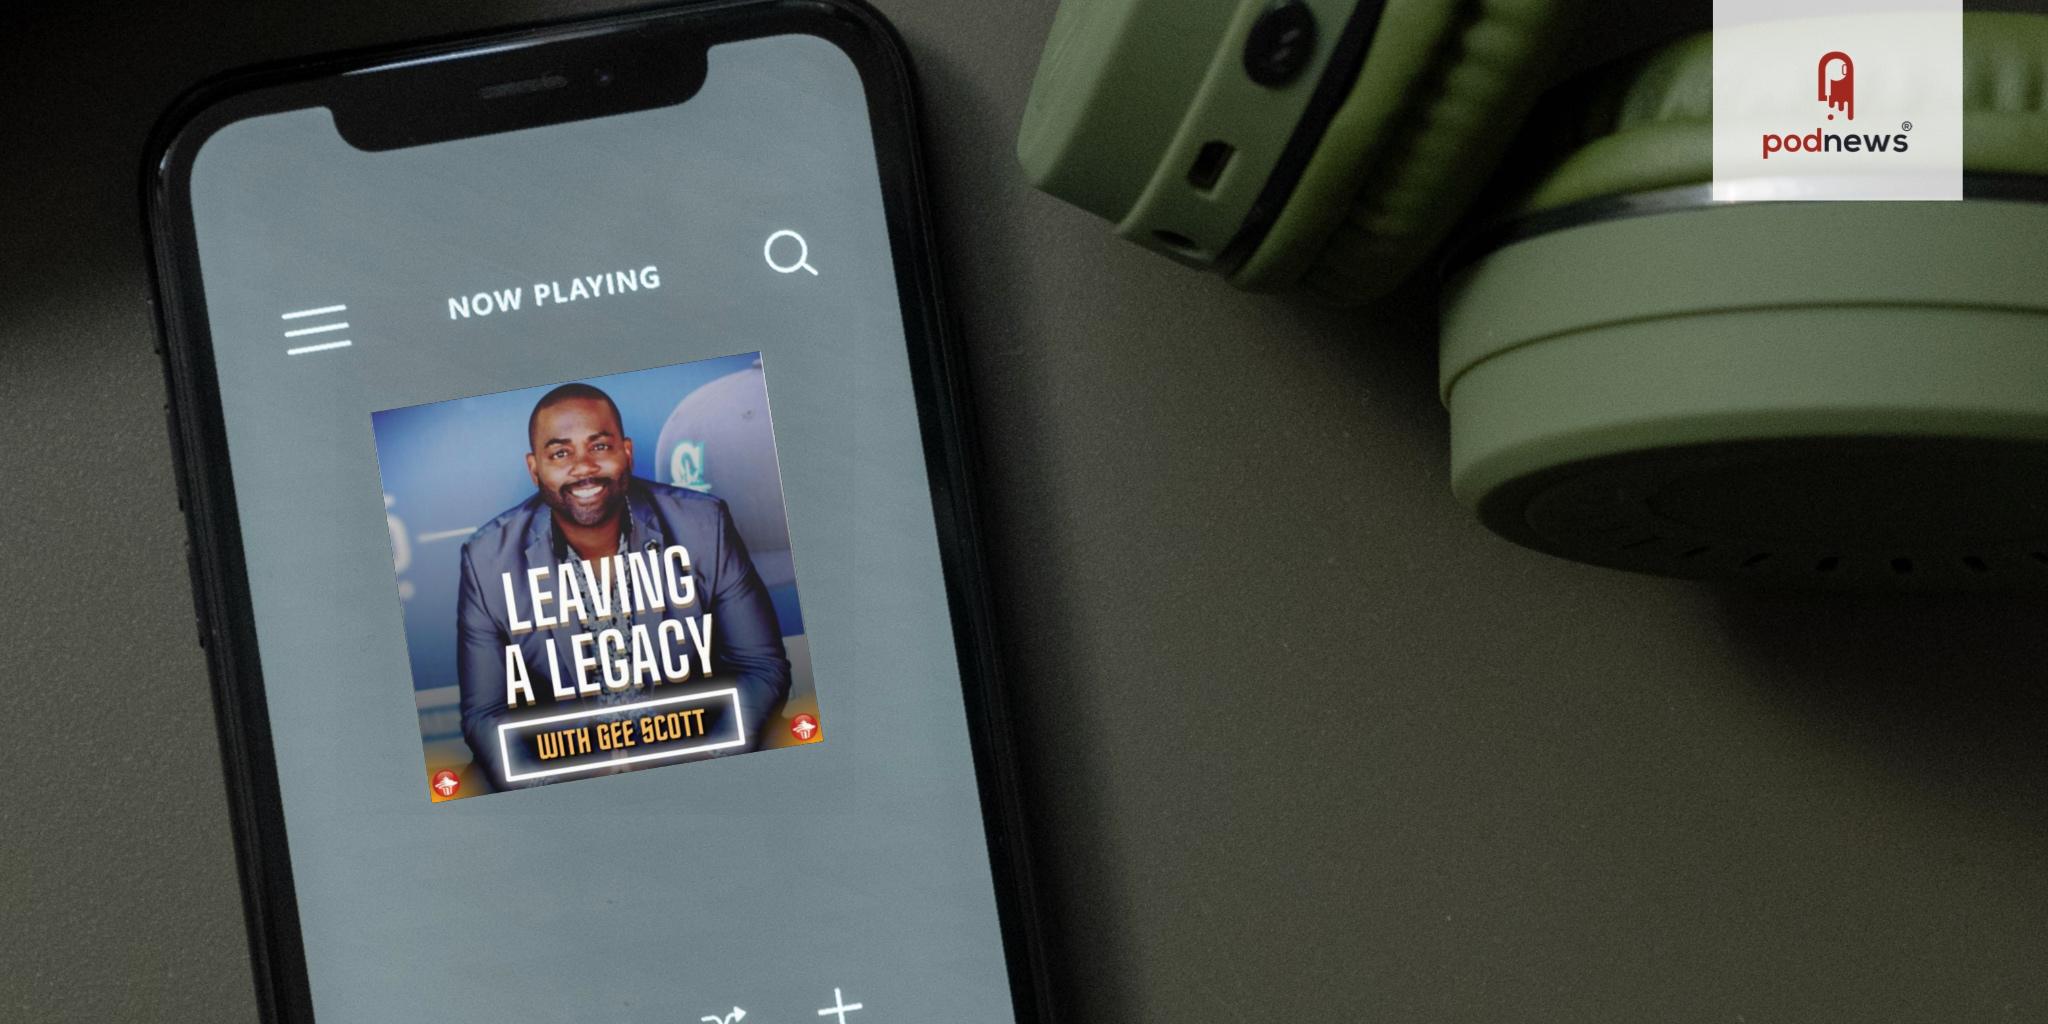 KIRO Radio launches Leaving a Legacy Podcast, hosted by Gee Scott